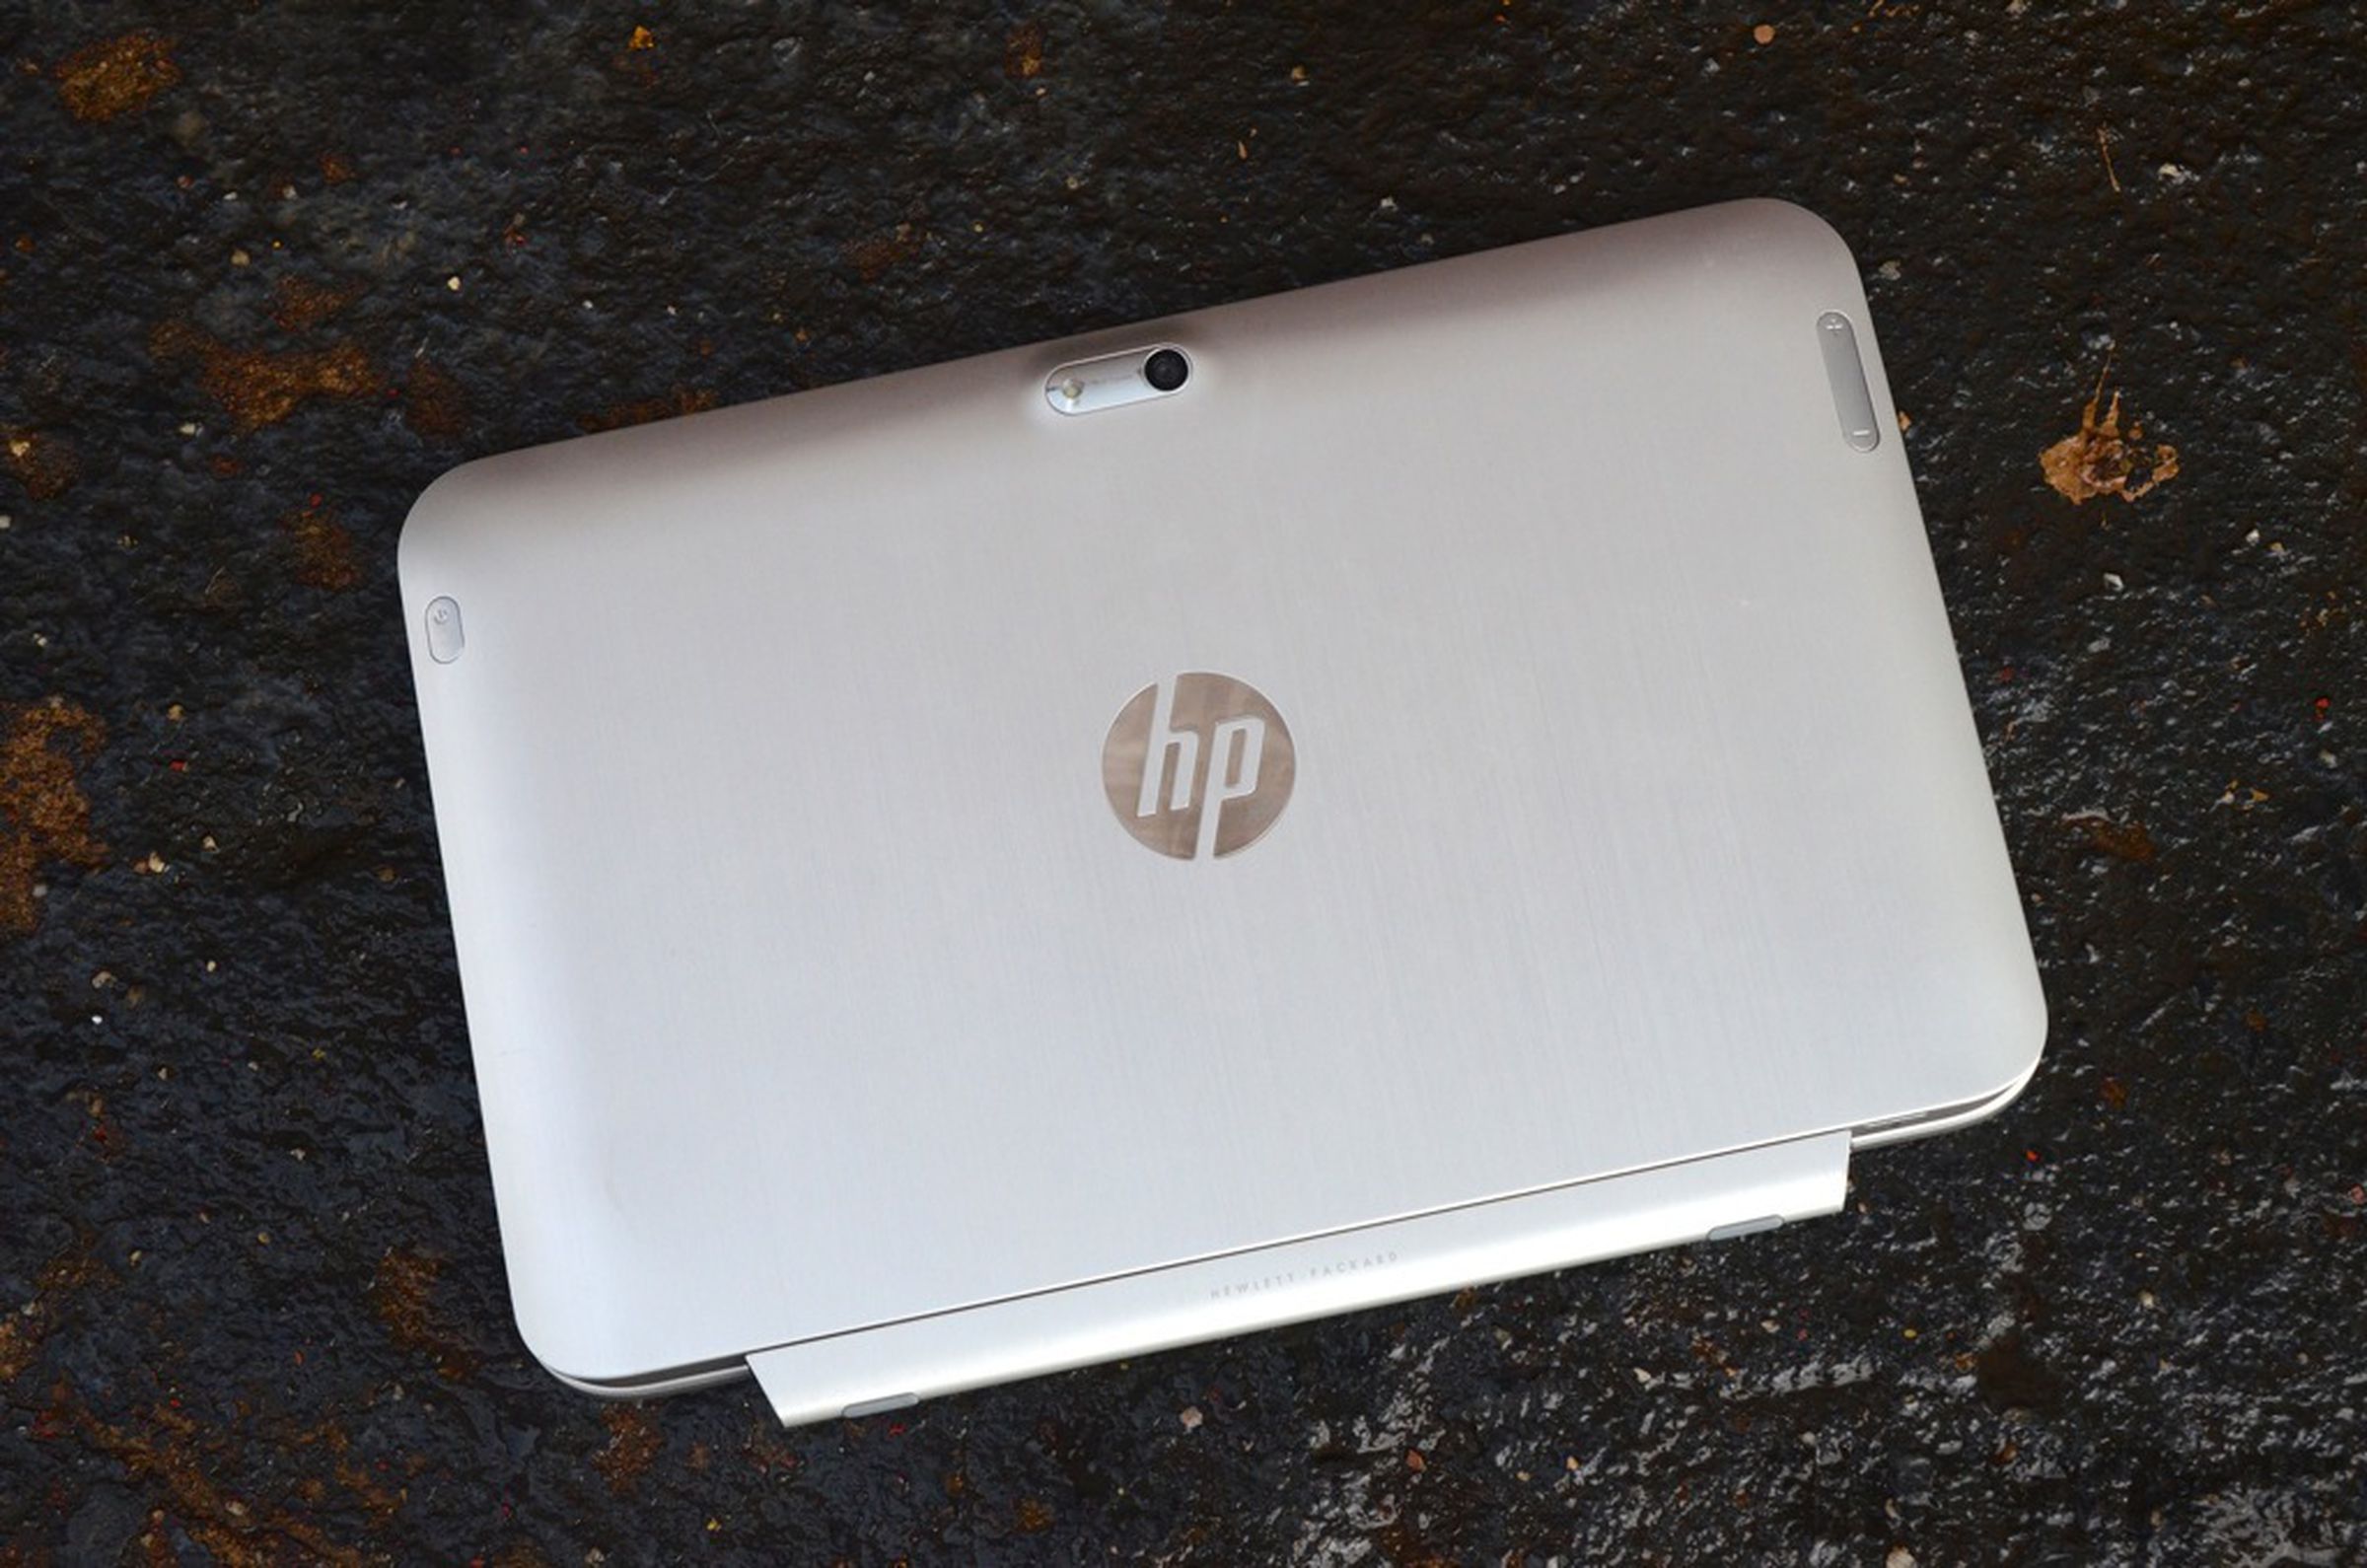 HP Envy x2 hands-on pictures